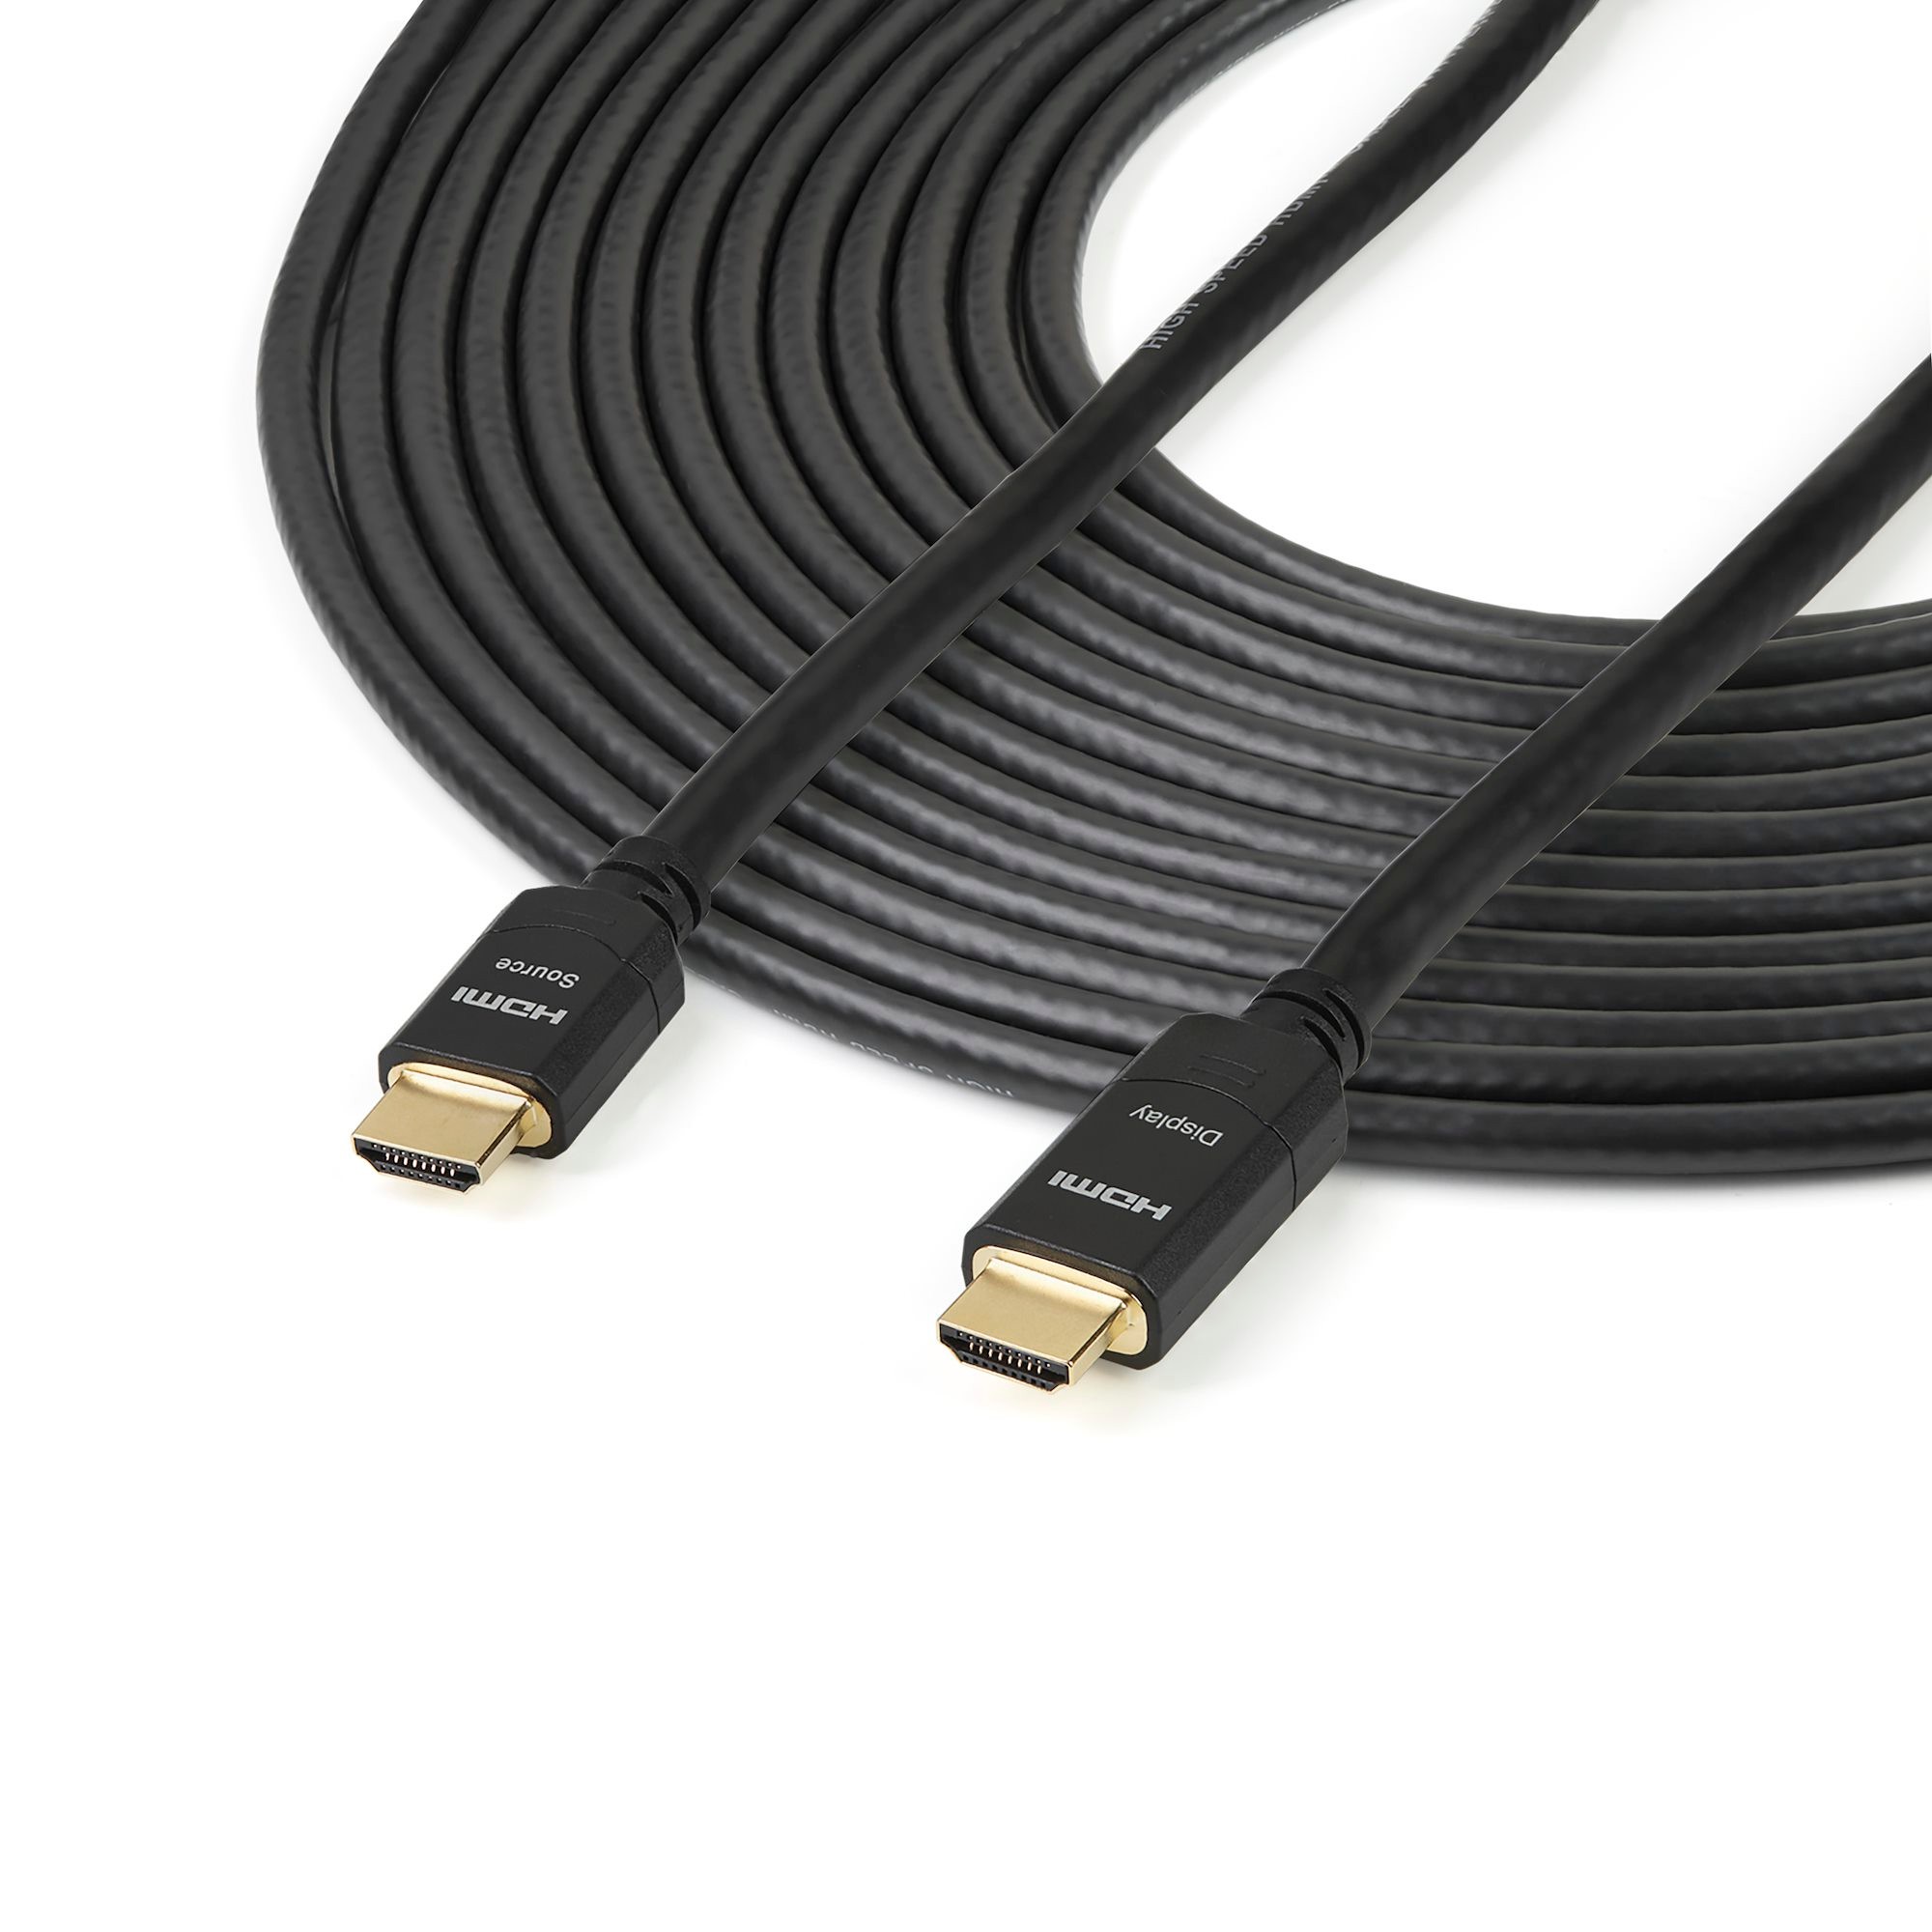 StarTech.com 50cm (1.6ft) HDMI Cable - 4K High Speed HDMI Cable with  Ethernet - UHD 4K 30Hz Video - HDMI 1.4 Cable - Ultra HD HDMI Monitors